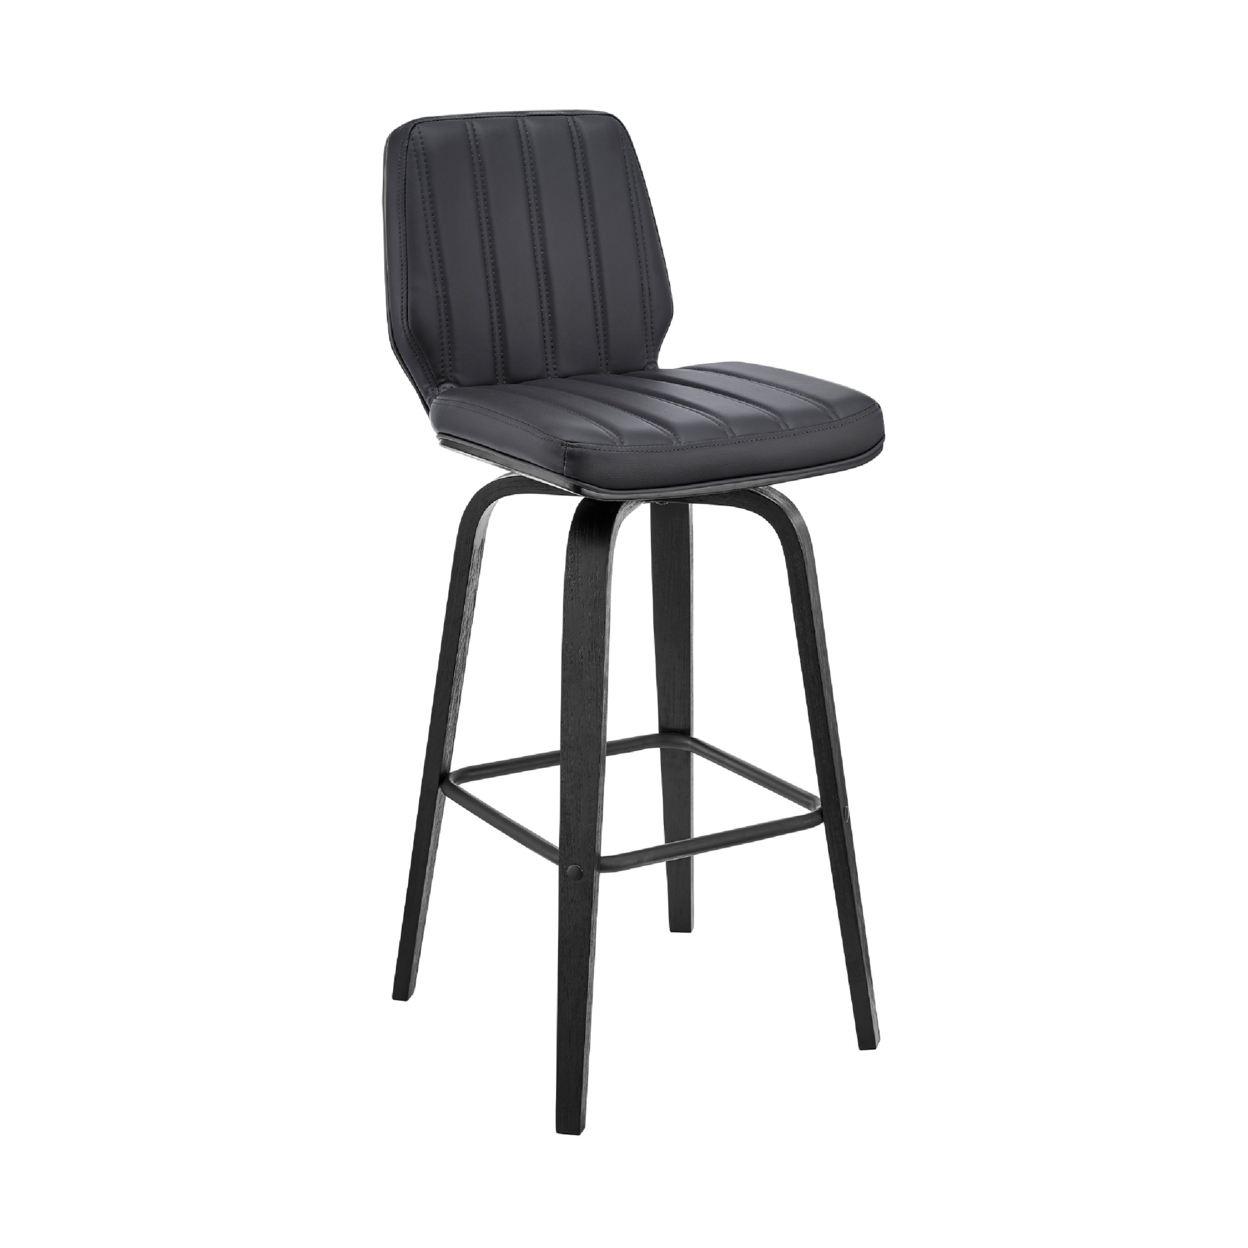 Swivel Barstool With Channel Stitching And Wooden Panel Support, Black- Saltoro Sherpi